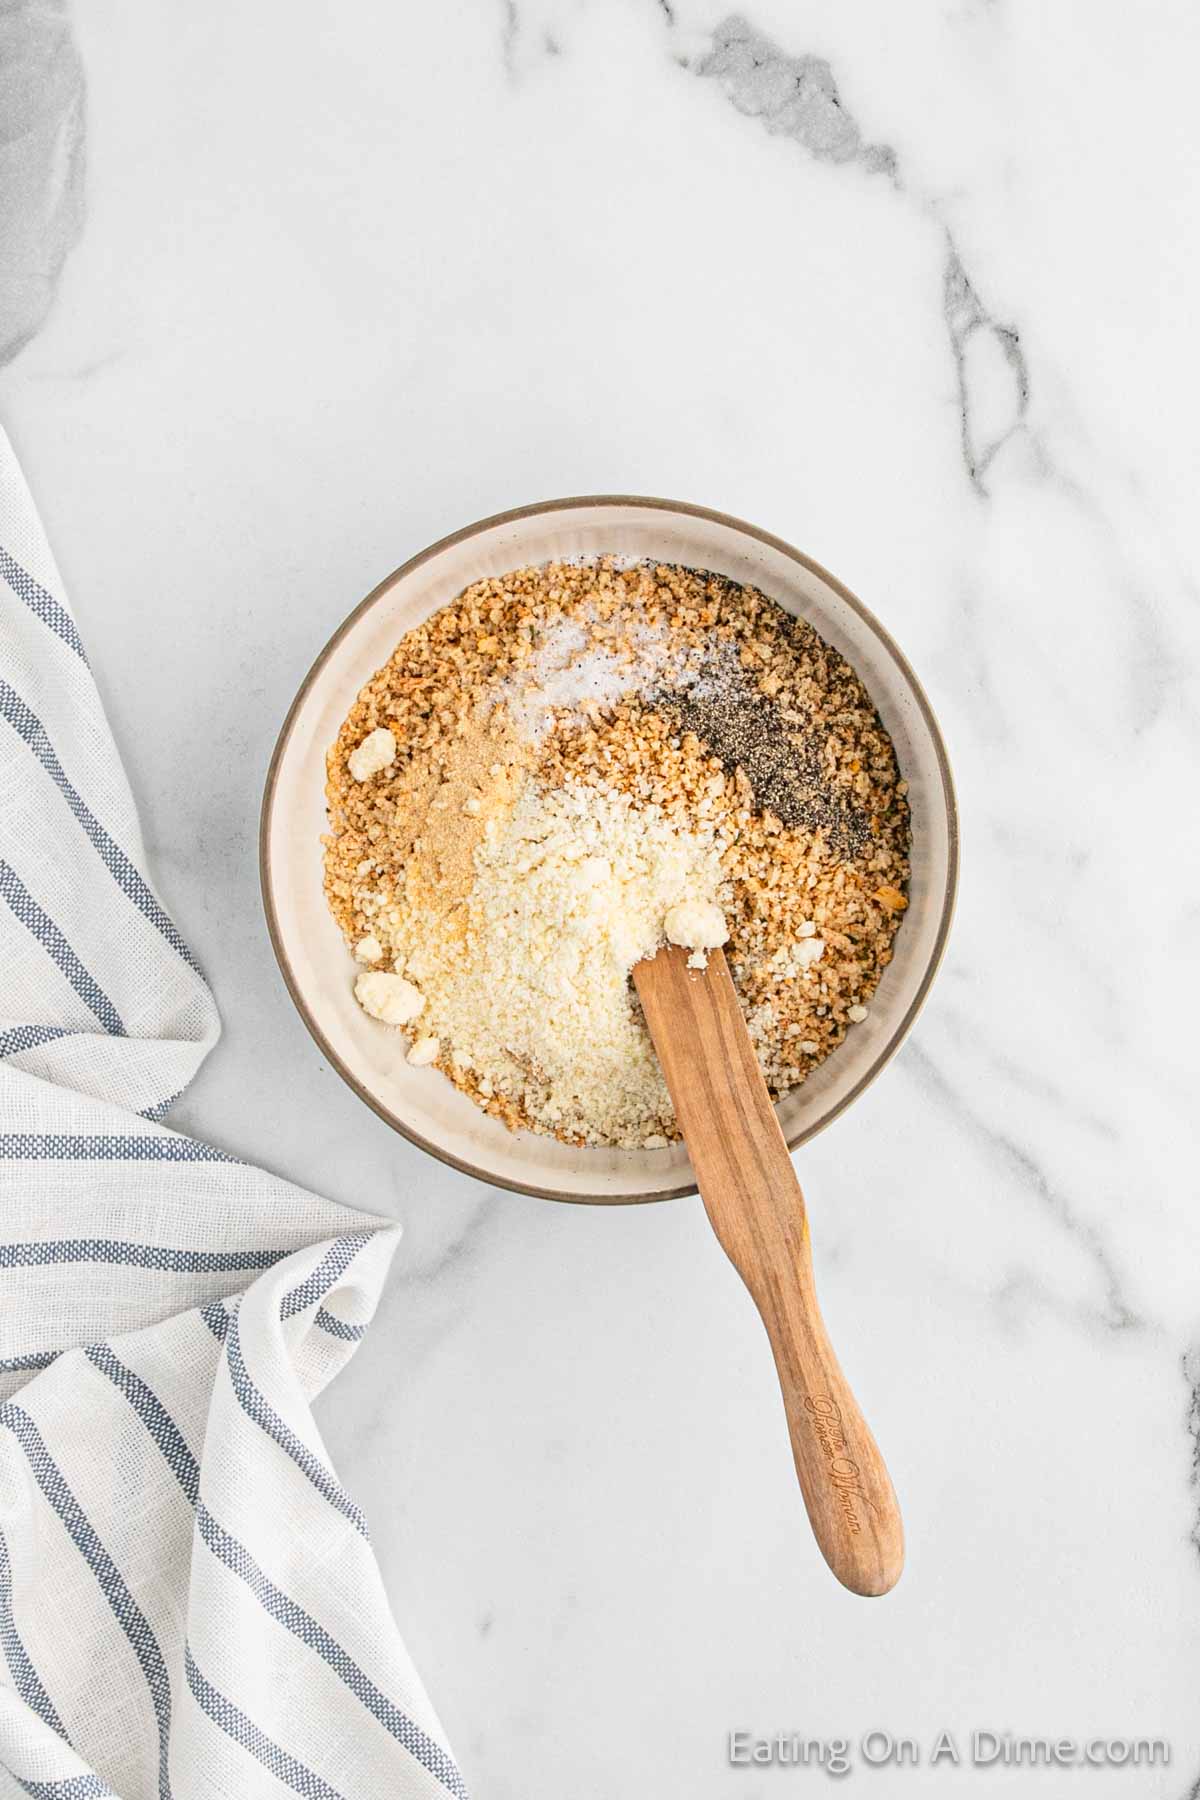 Combining the breadcrumbs and spice together in a bowl with a wooden spoon